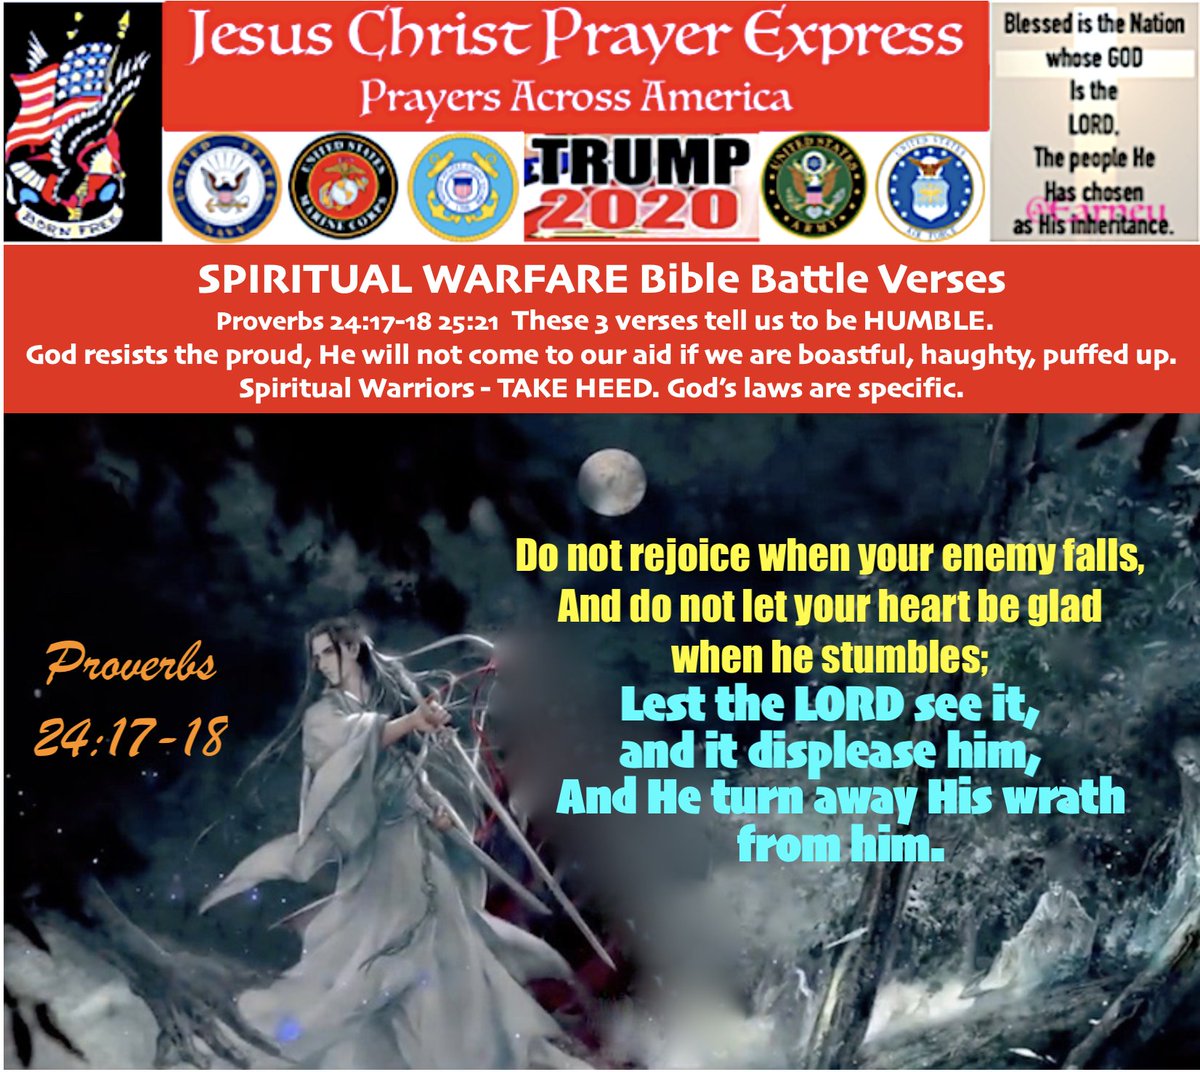 Jesus Christ Prayer Express  #JCPESPIRITUAL WARFARE EDITION- Prayer Warriors On Deck3.a&b) The next 3 Verses are His Rules for us to start:PRs-just HEADS UP for the new Express @KBUSMC2  @SmokieMtnsWendy  @AmateurMmo  @swilleford2  @jujutsucop  @TheyCallmeDoc1  @JCPExpress